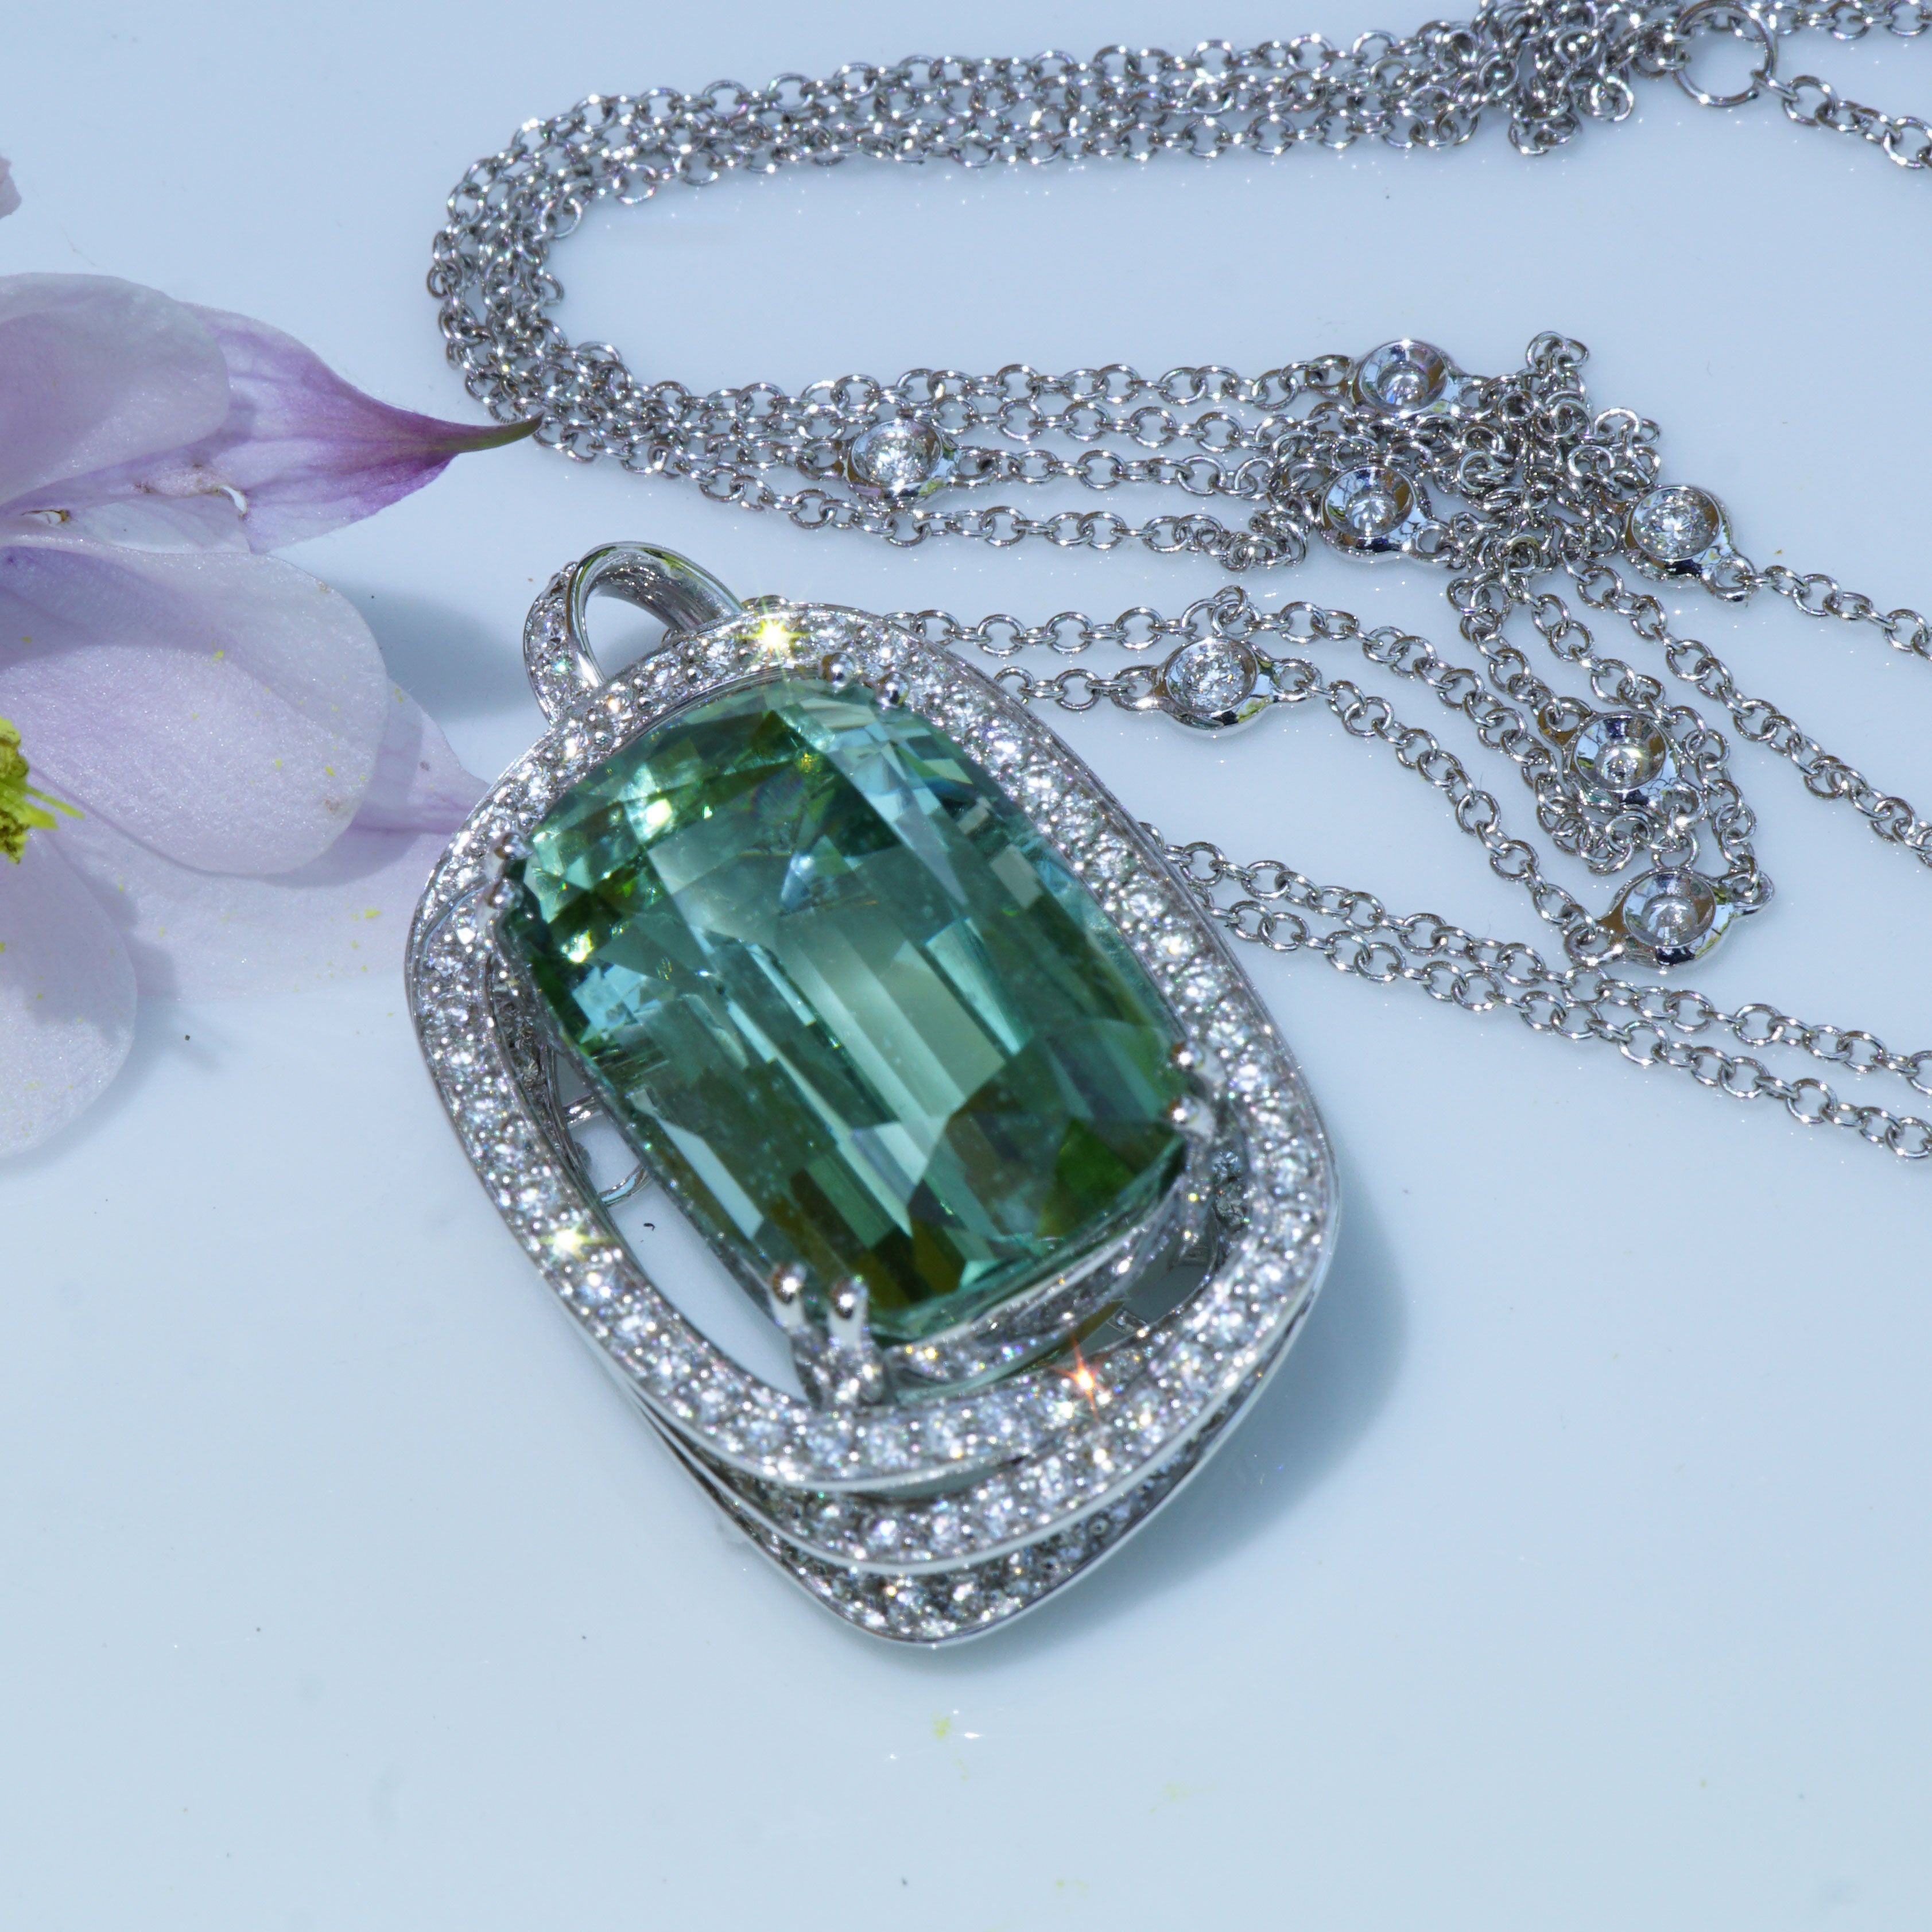 is one of the most beautiful gemstone colors there is the SEAFOAM GREEN tourmaline from Afghanistan (Seafoam green) with excellent luminosity and brilliance as with most Afghan tourmalines, AAA+, flawless, effectively set in an elliptical